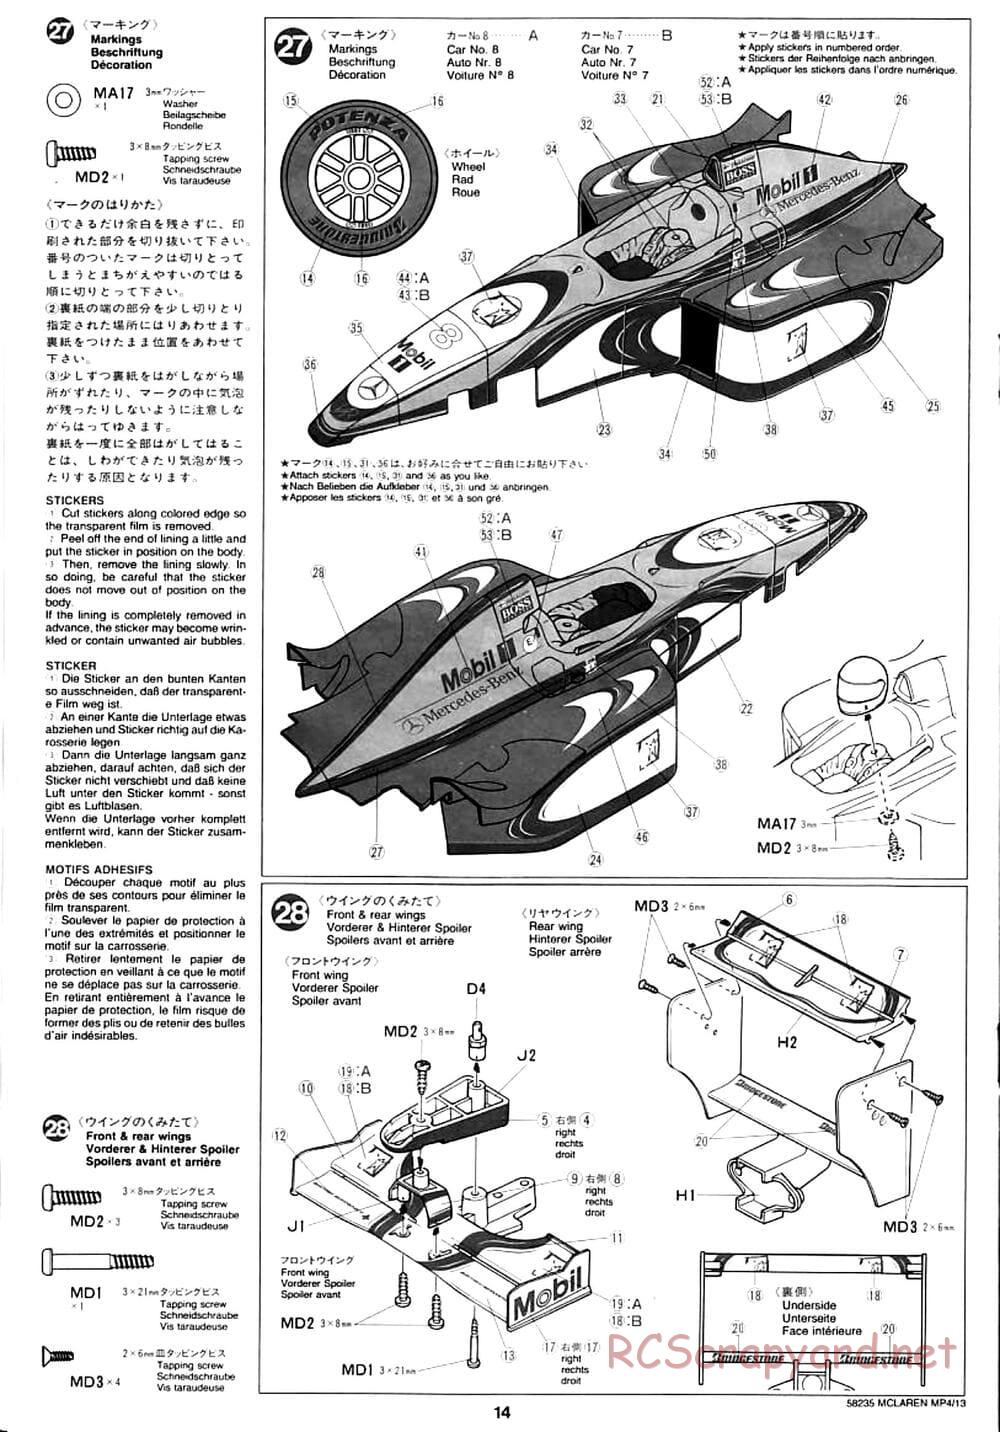 Tamiya - McLaren Mercedes MP4/13 - F103RS Chassis - Manual - Page 14